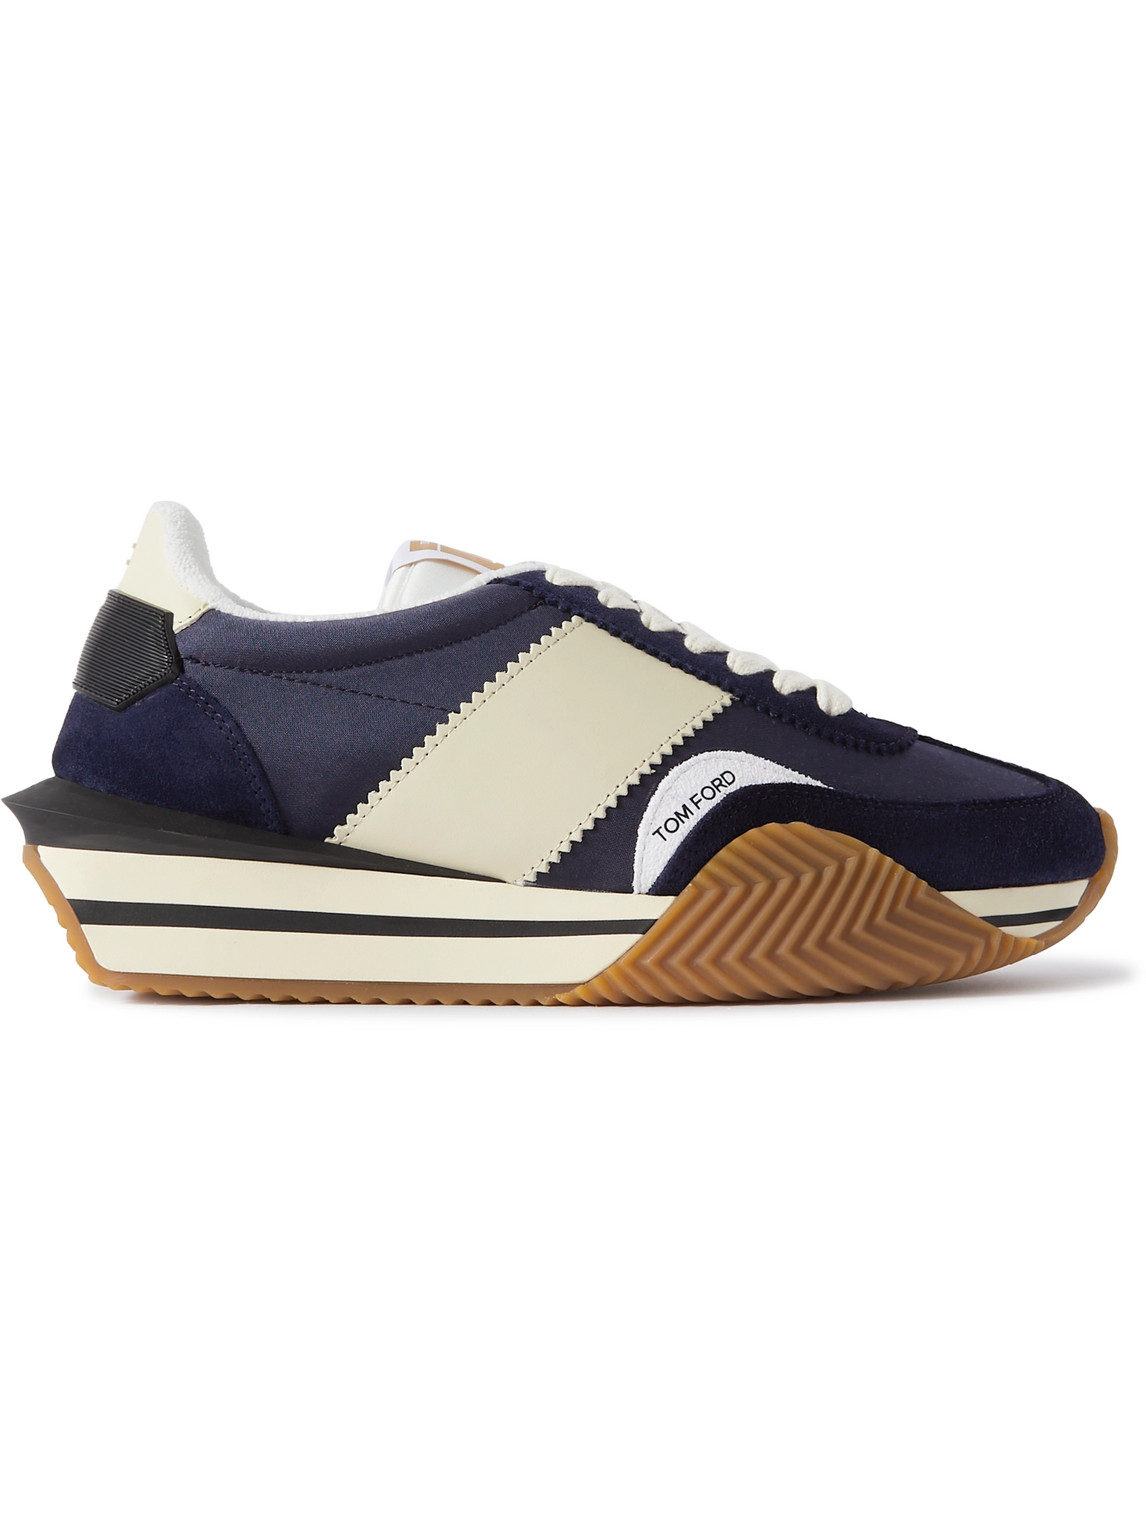 TOM FORD JAMES RUBBER-TRIMMED SUEDE, NYLON AND LEATHER SNEAKERS